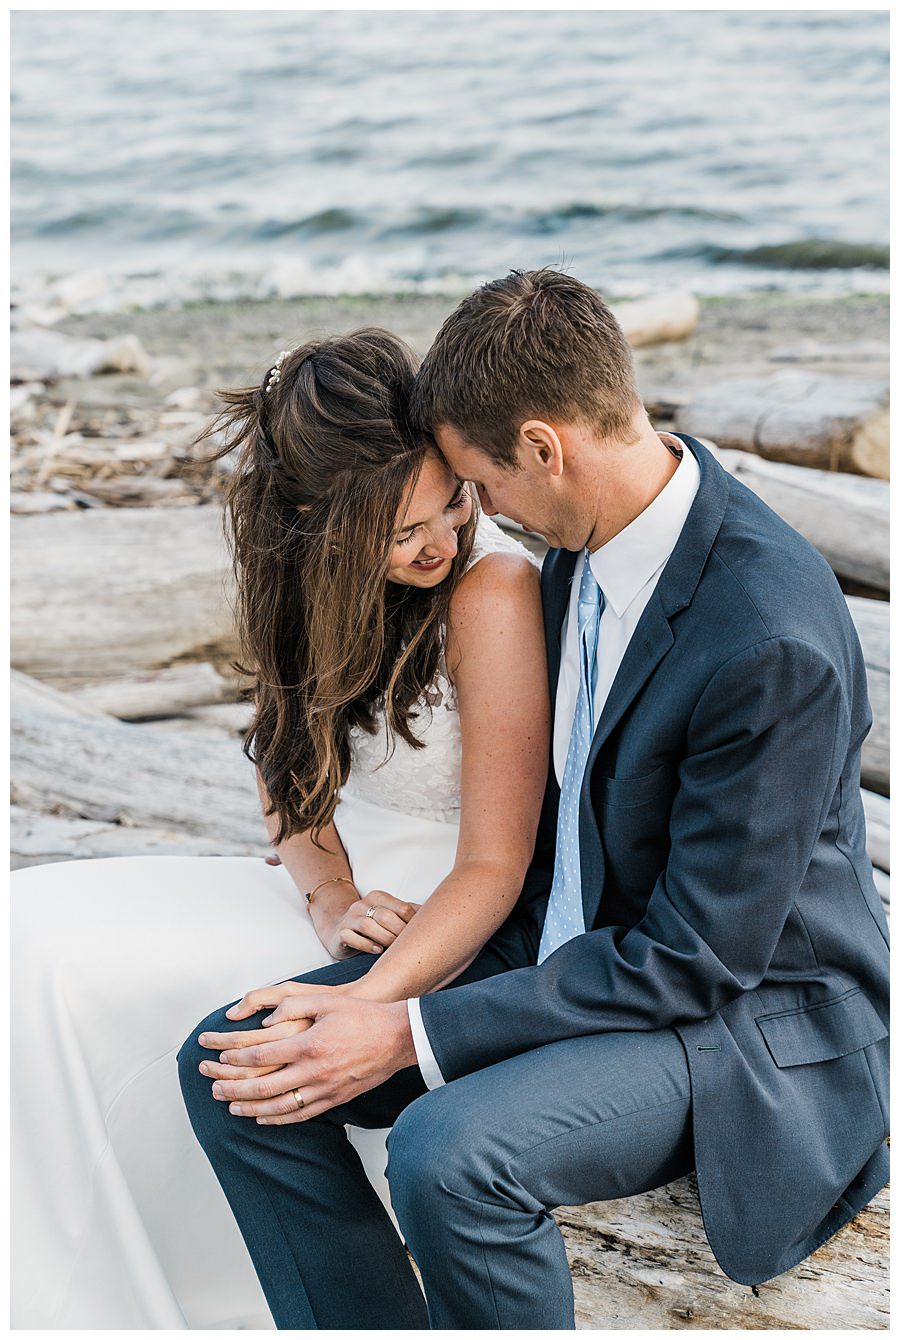 A bride and groom snuggle together on the beach during their Camano Island elopement photographed by Amy Galbraith